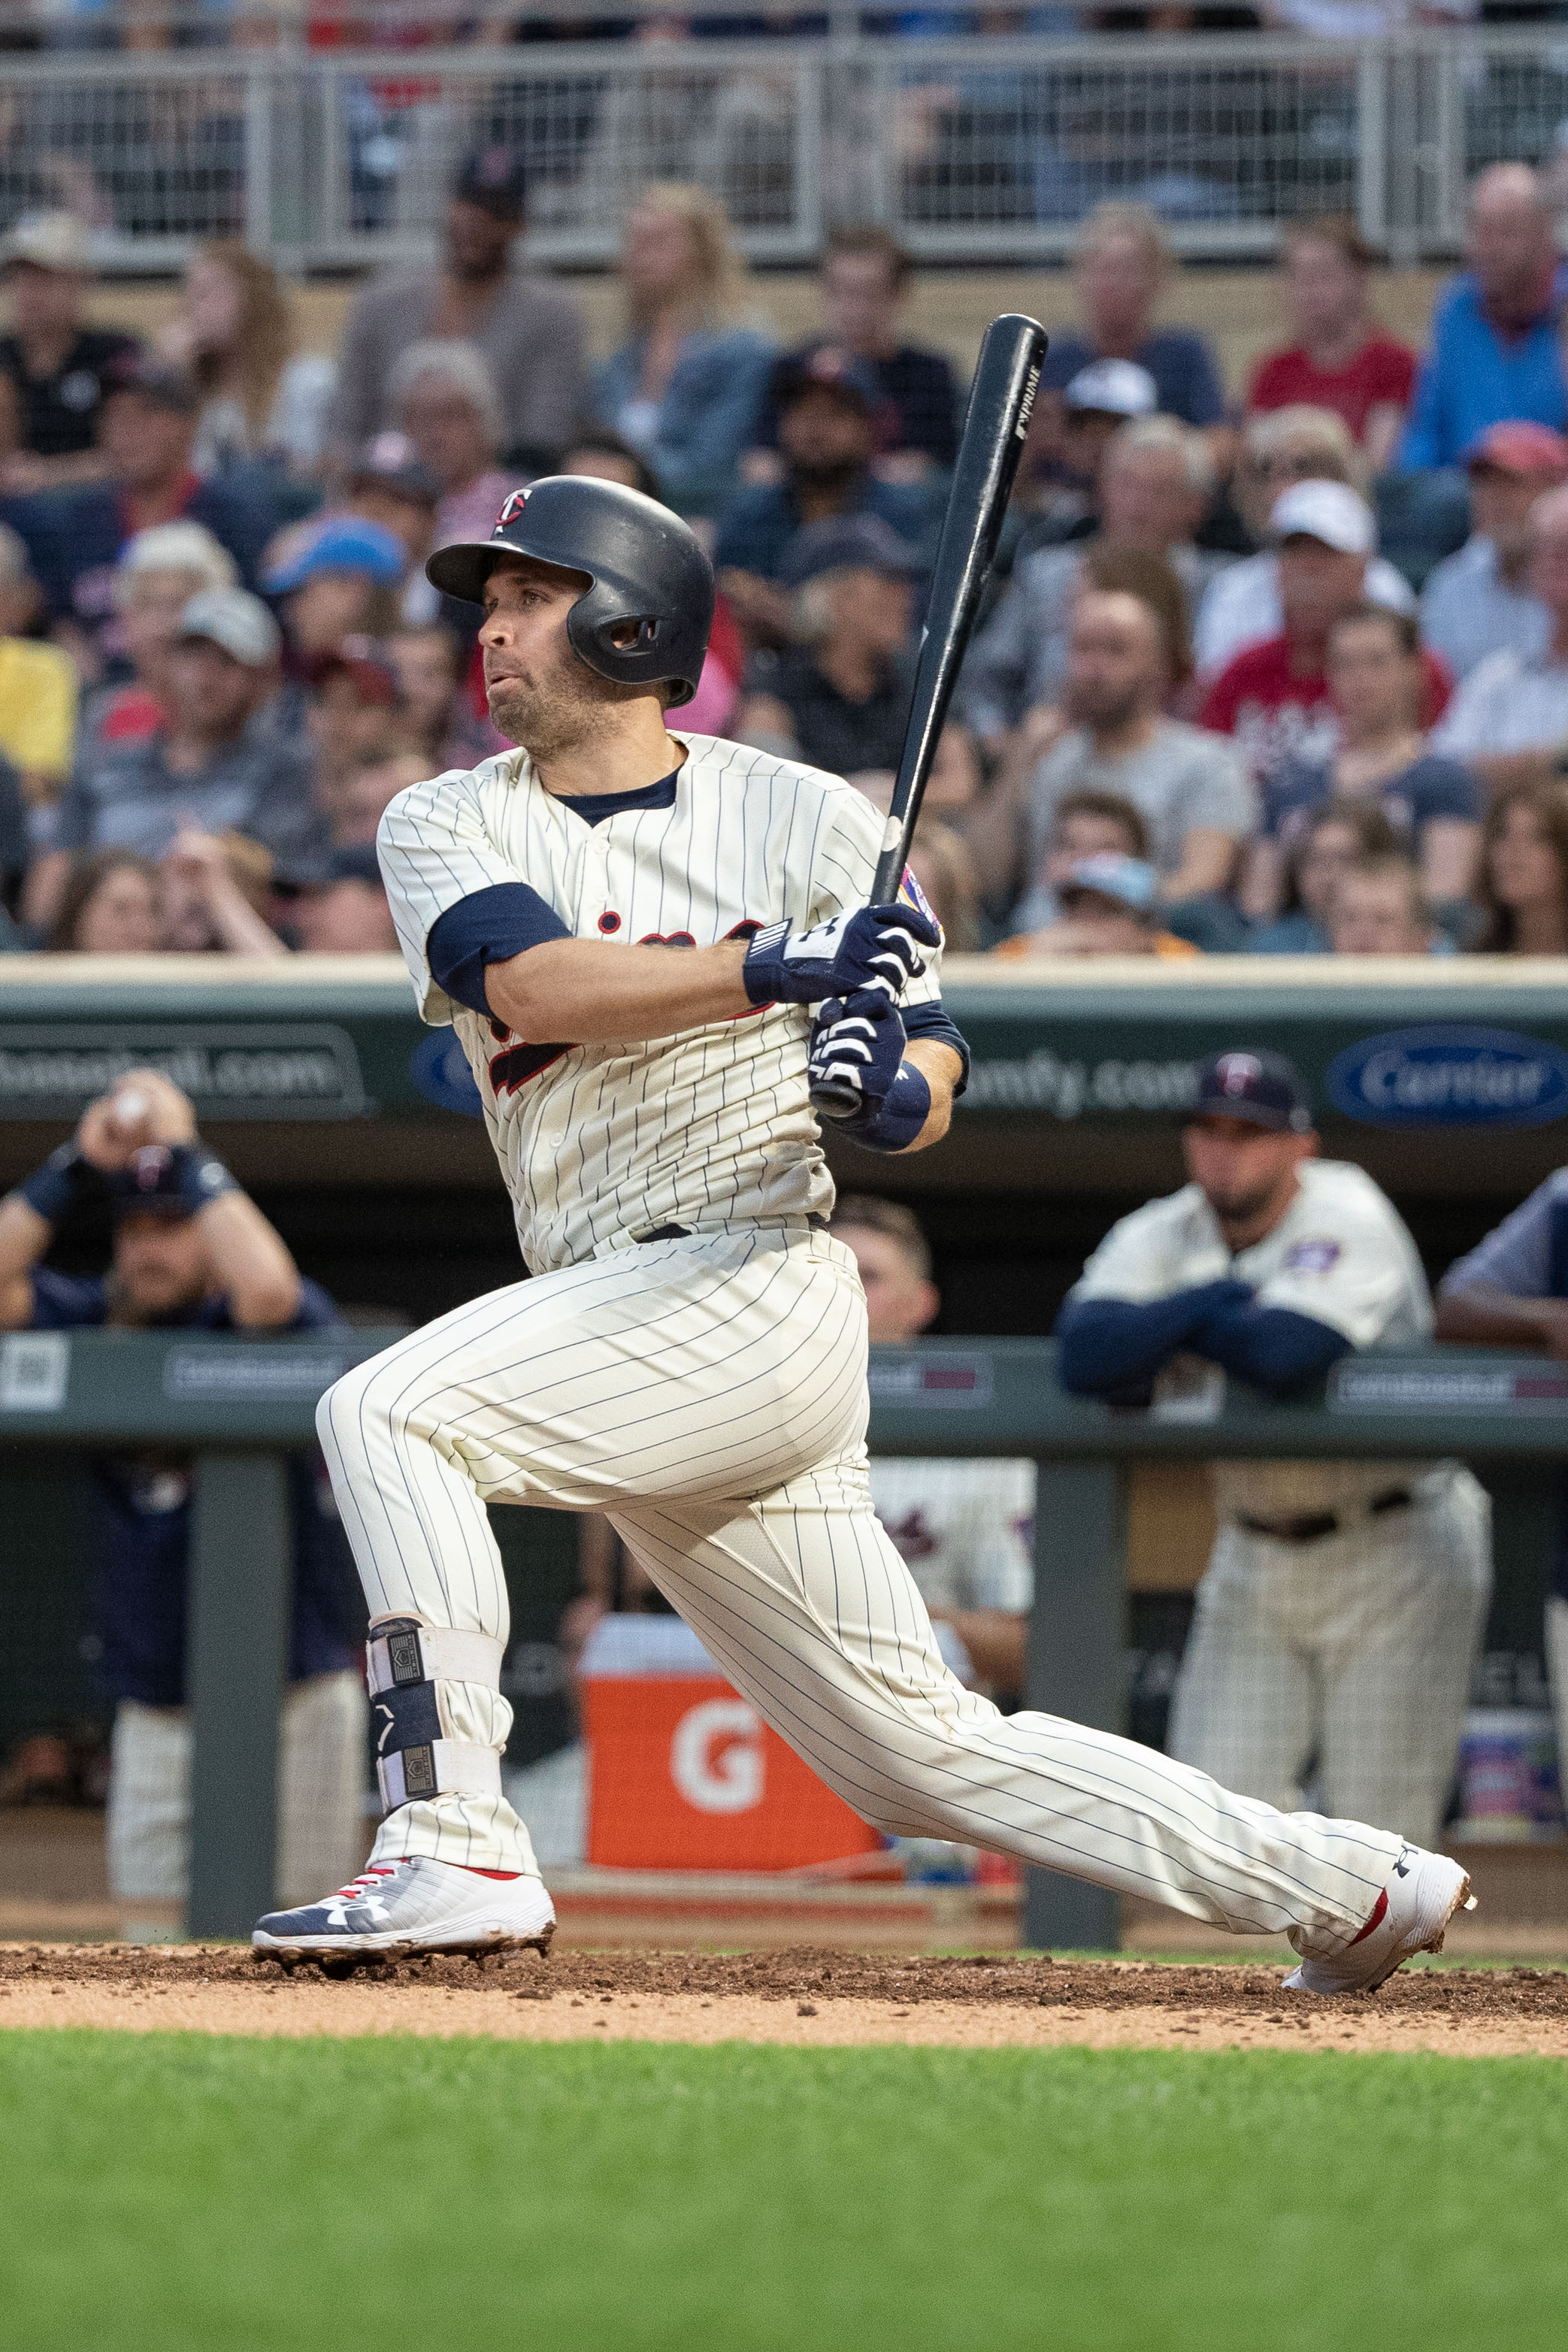 Brian Dozier sounds willing to walk away from Twins after season